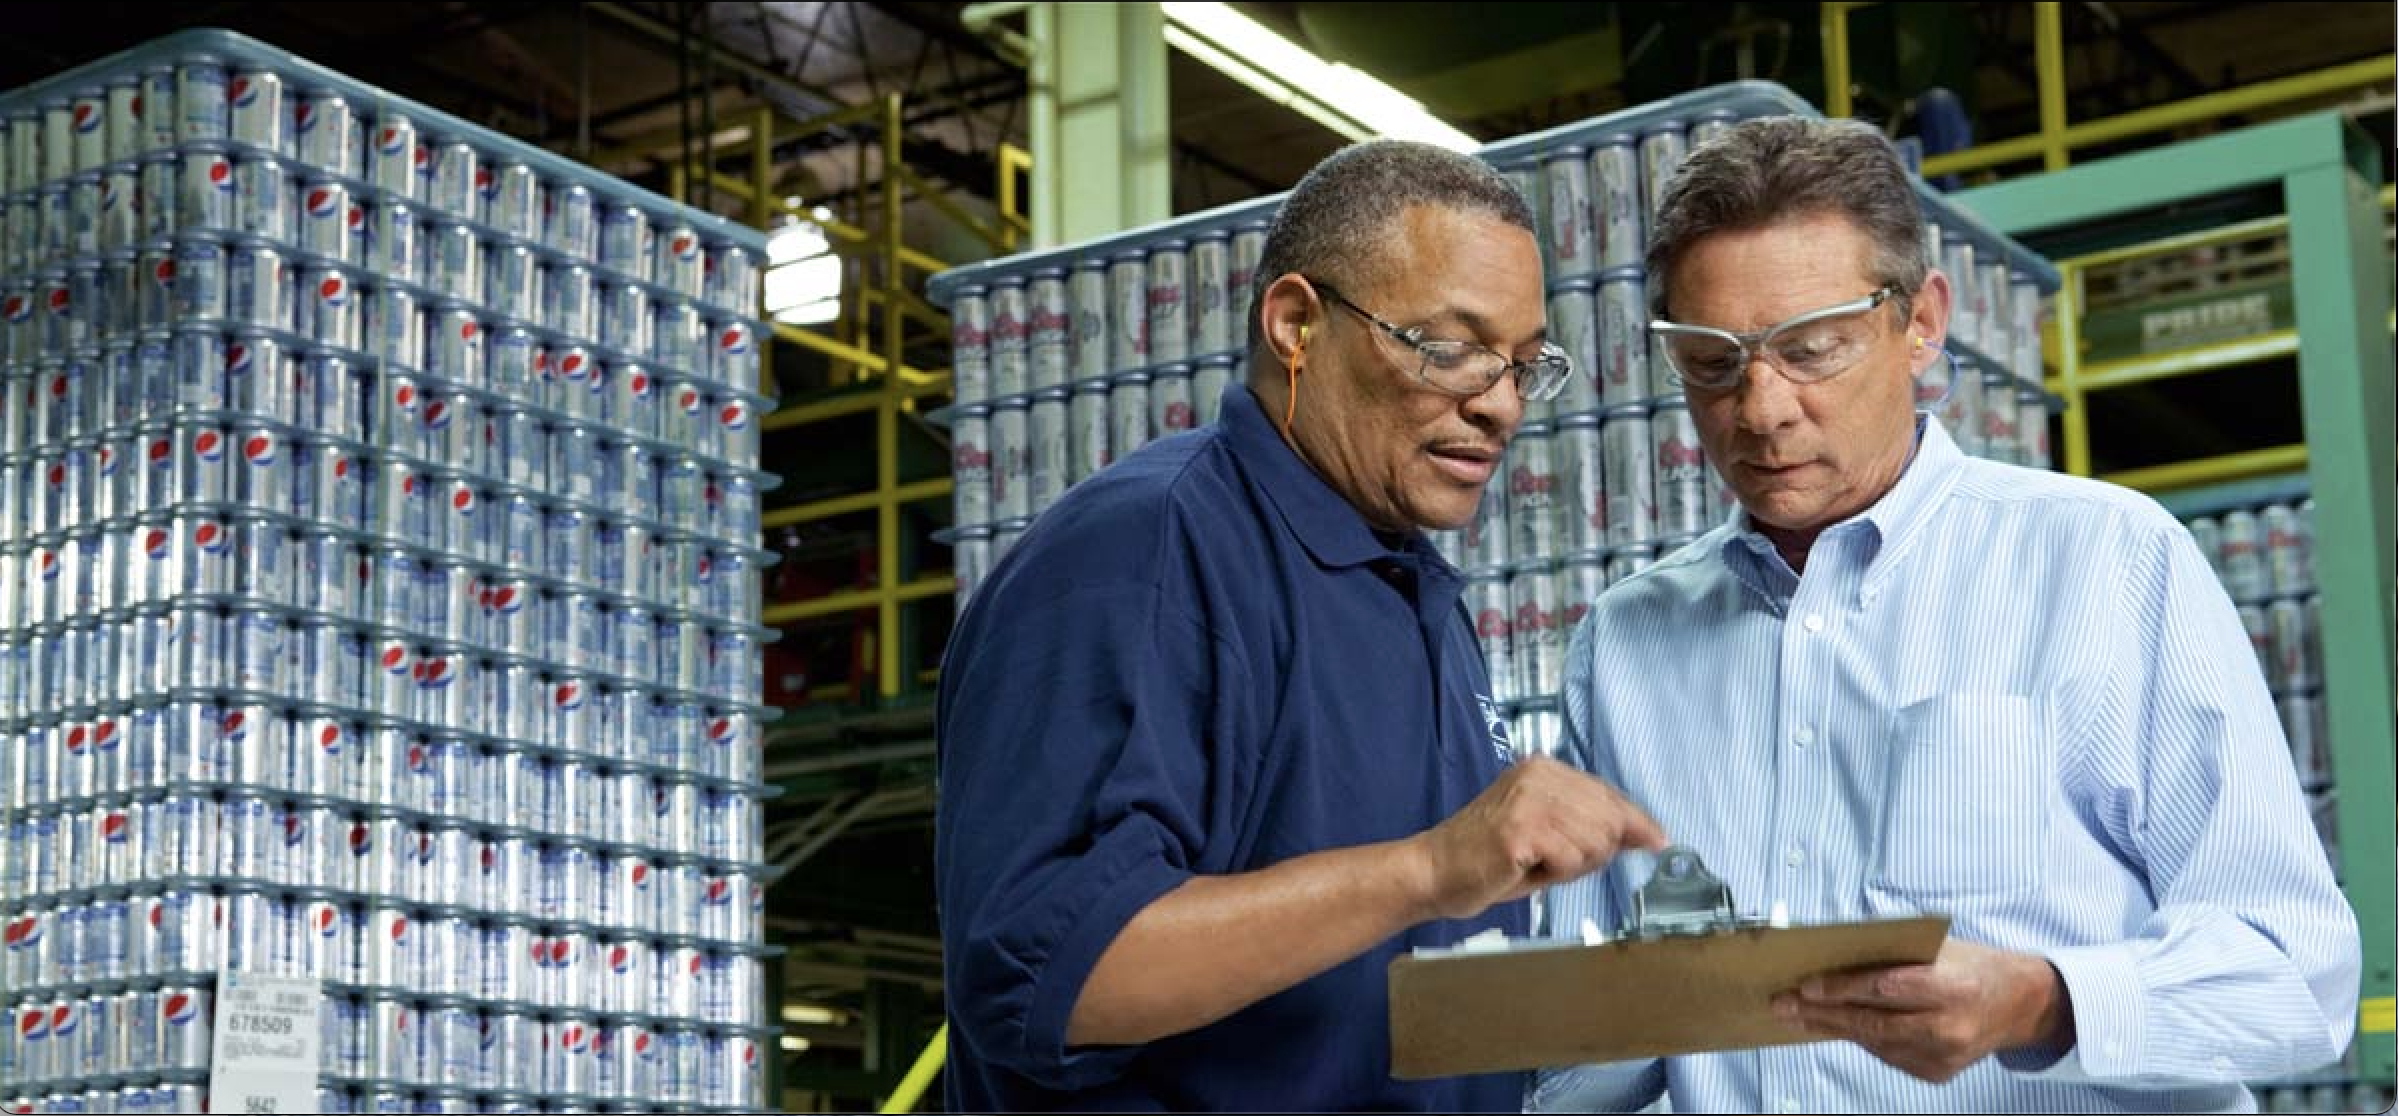 two people in a warehouse reviewing a document